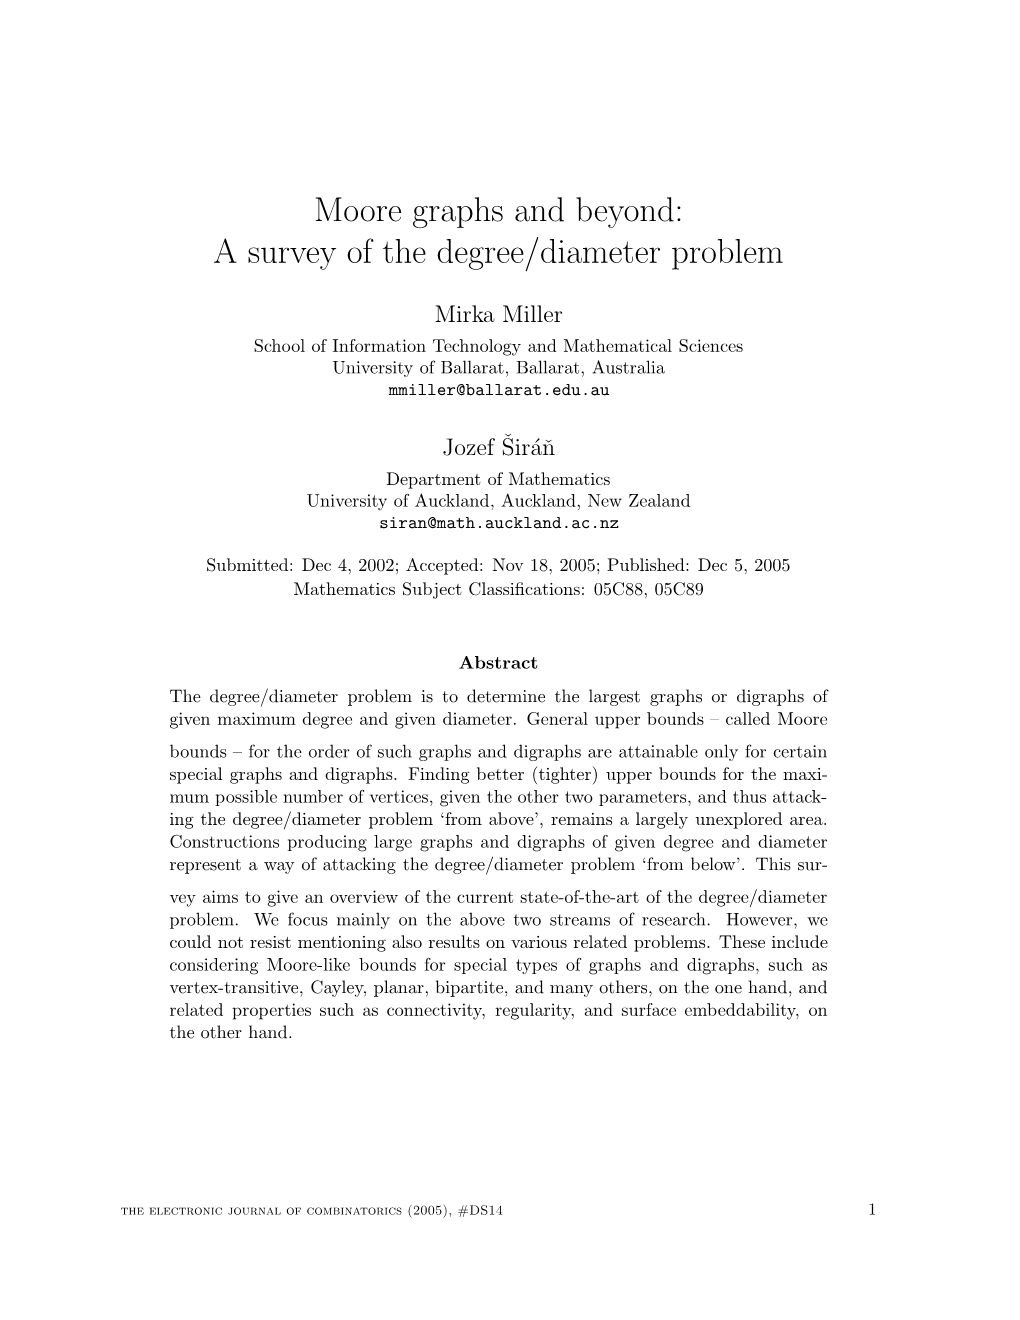 Moore Graphs and Beyond: a Survey of the Degree/Diameter Problem